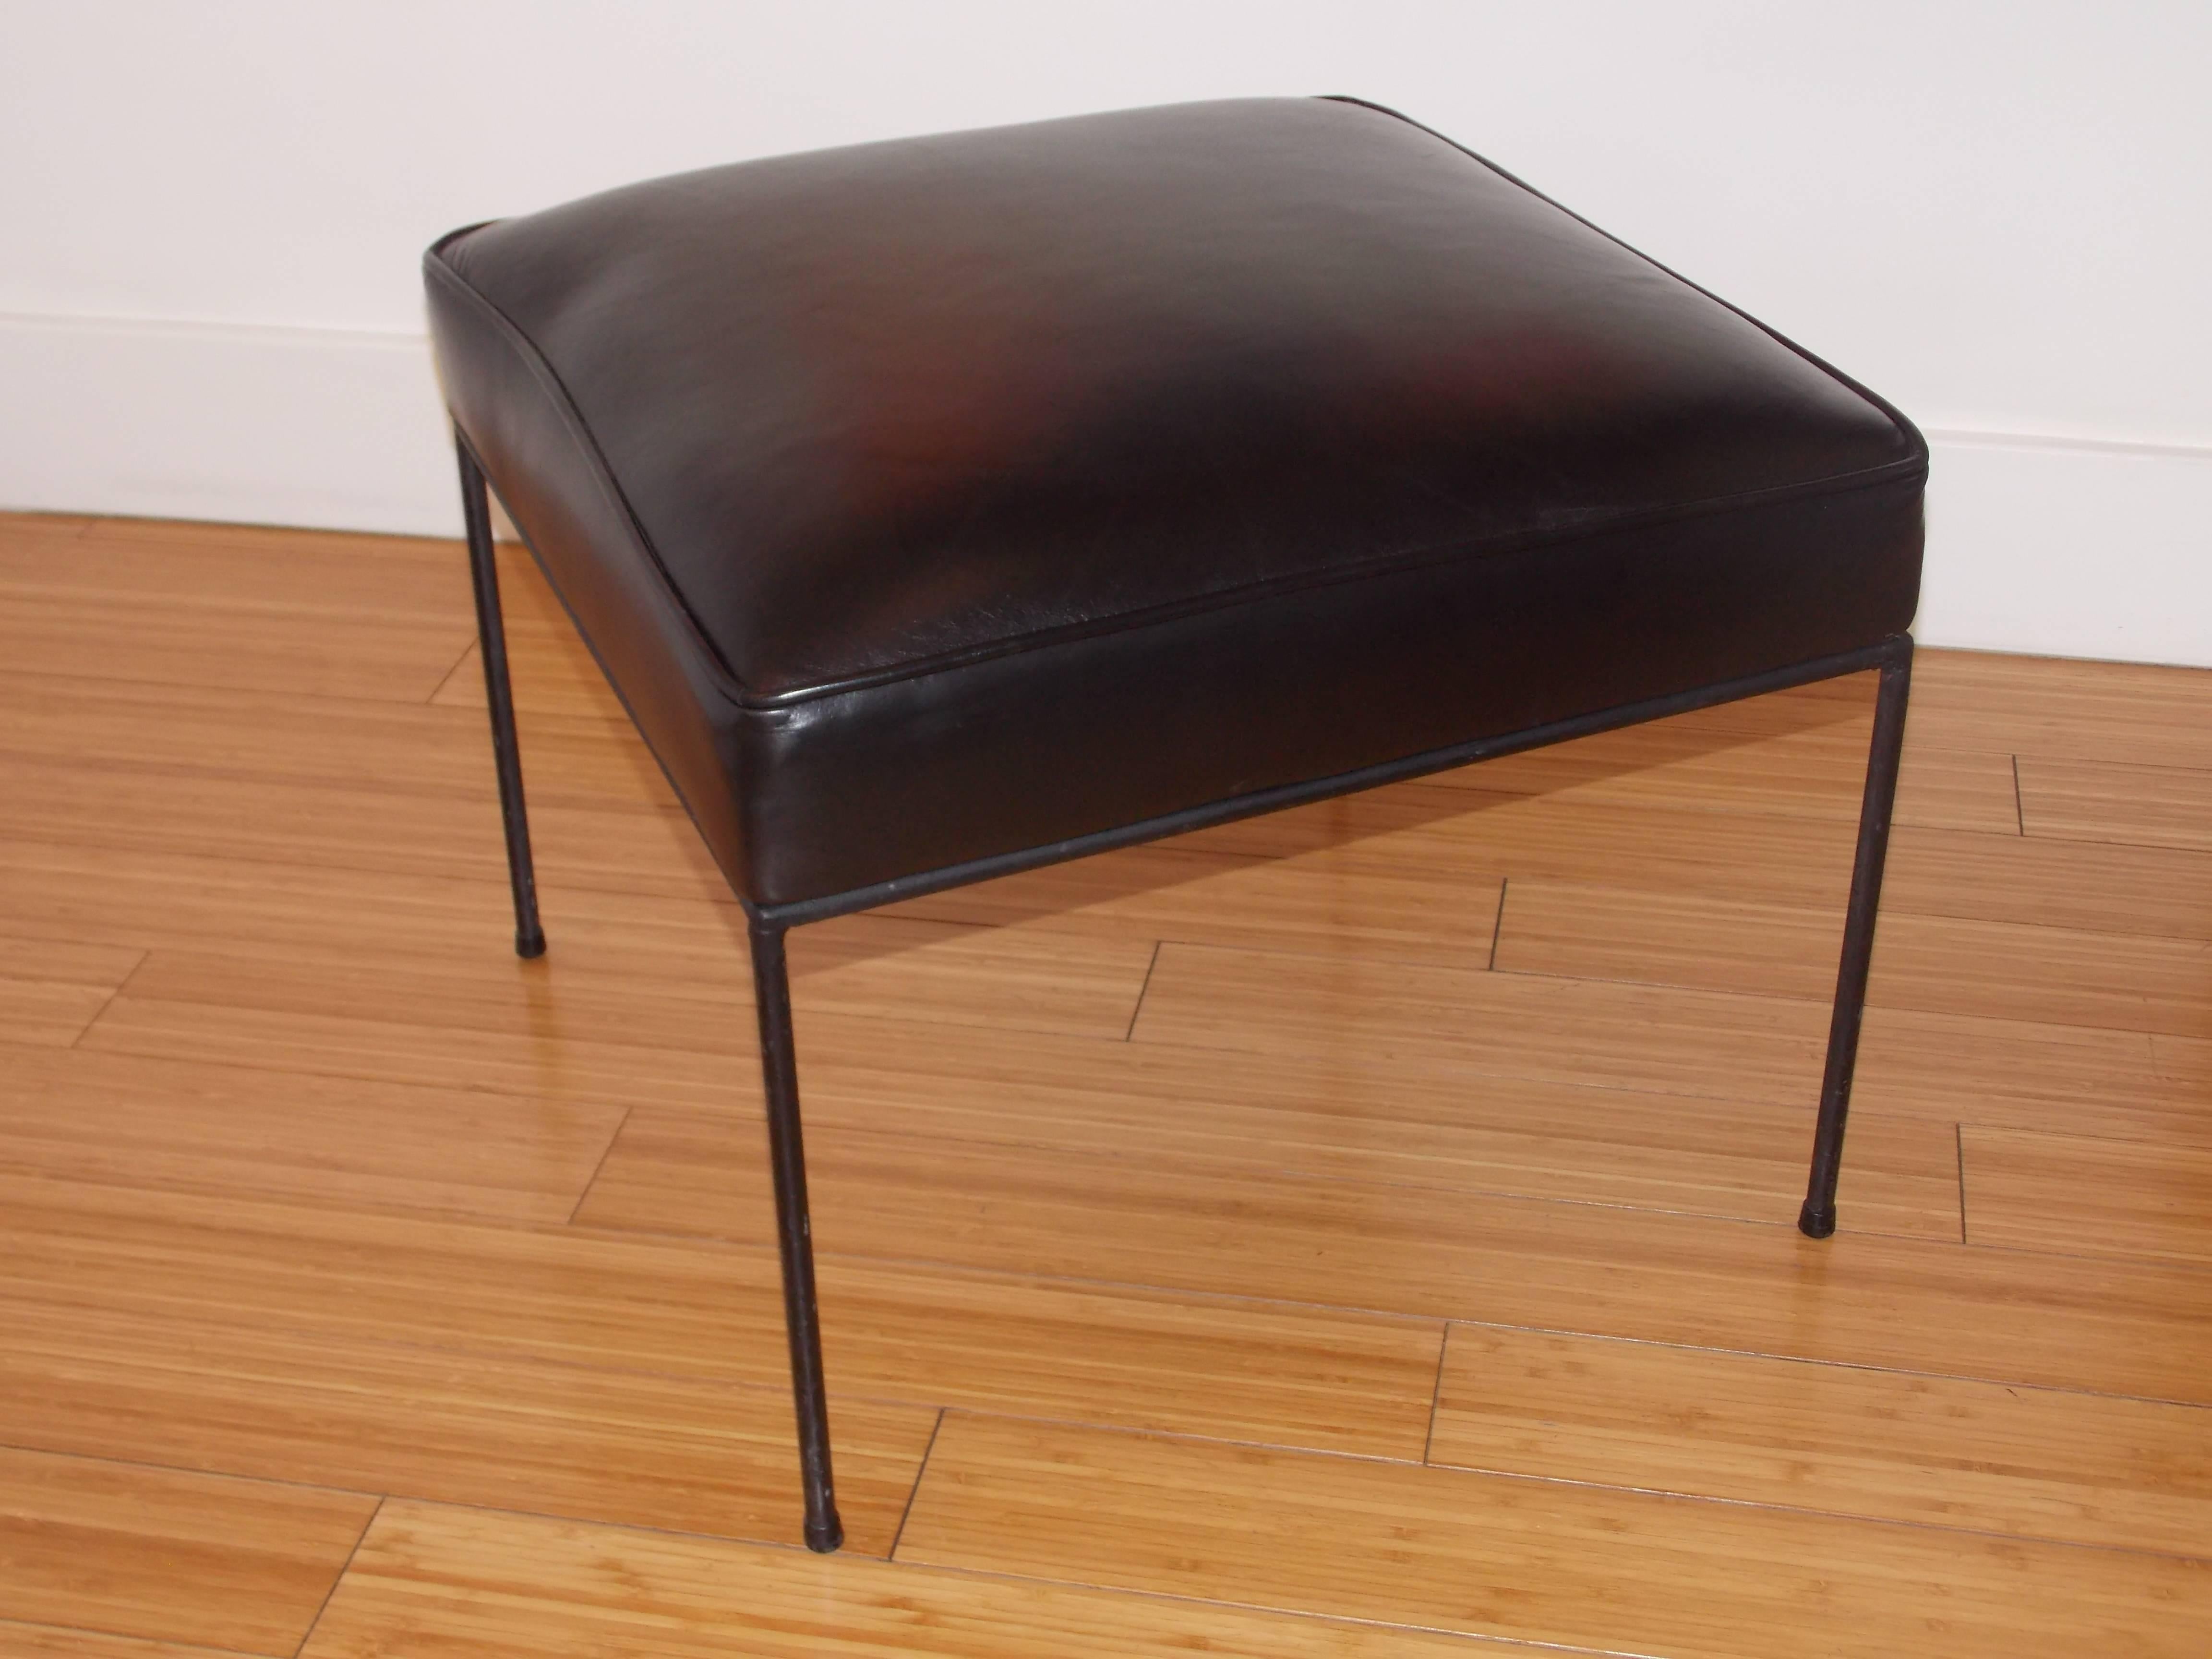 Reupholstered with a chic black leather. The base is rod iron with the original ware, patina and screws. A great humble design to place anywhere in the home or office.